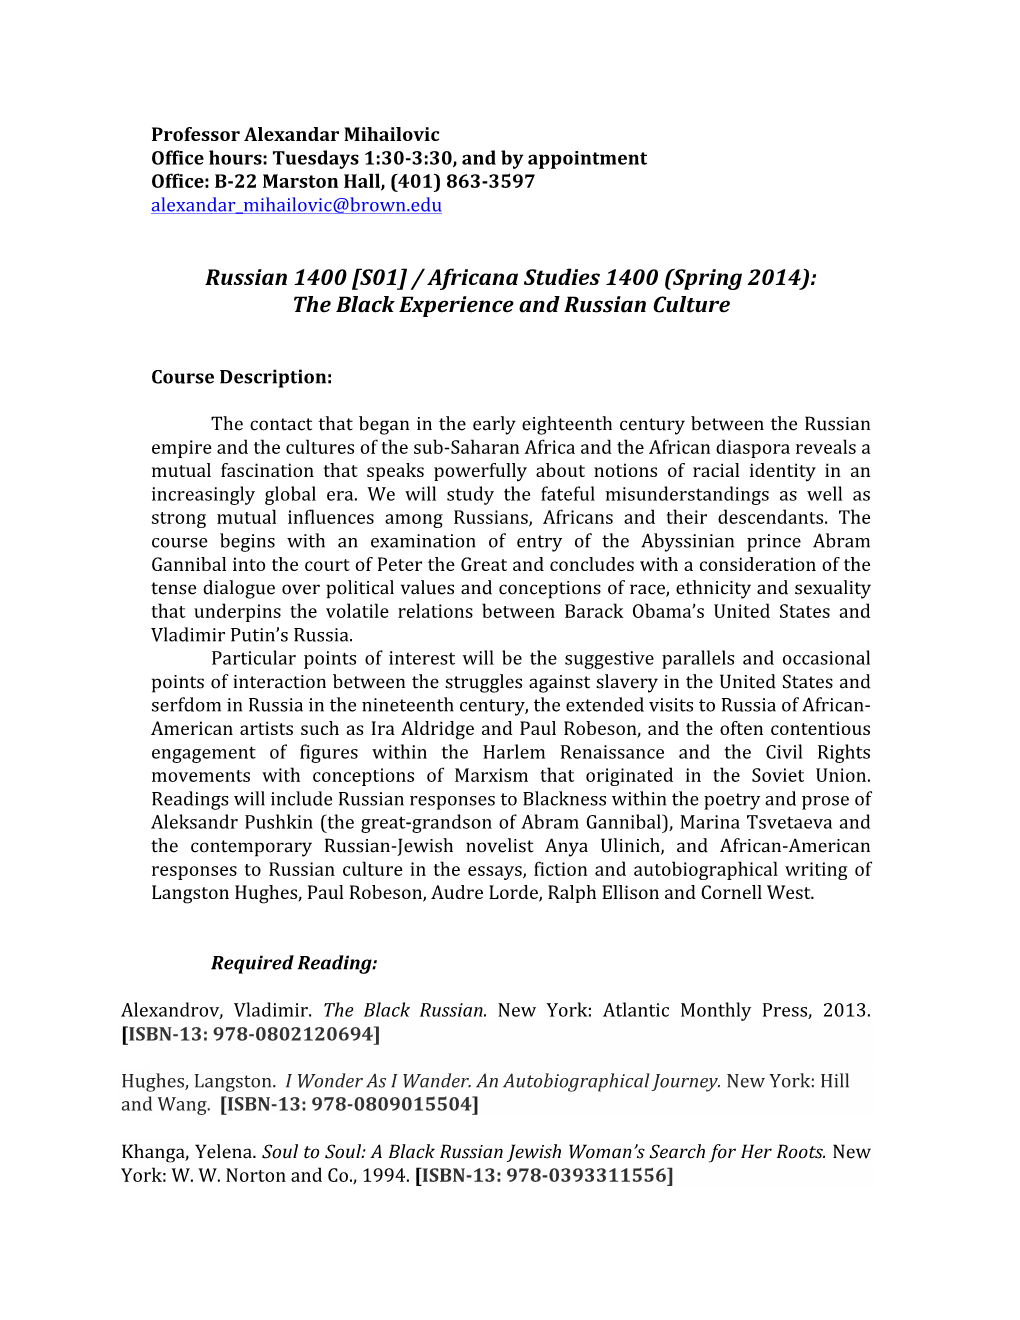 Russian 1400 [S01] / Africana Studies 1400 (Spring 2014): the Black Experience and Russian Culture